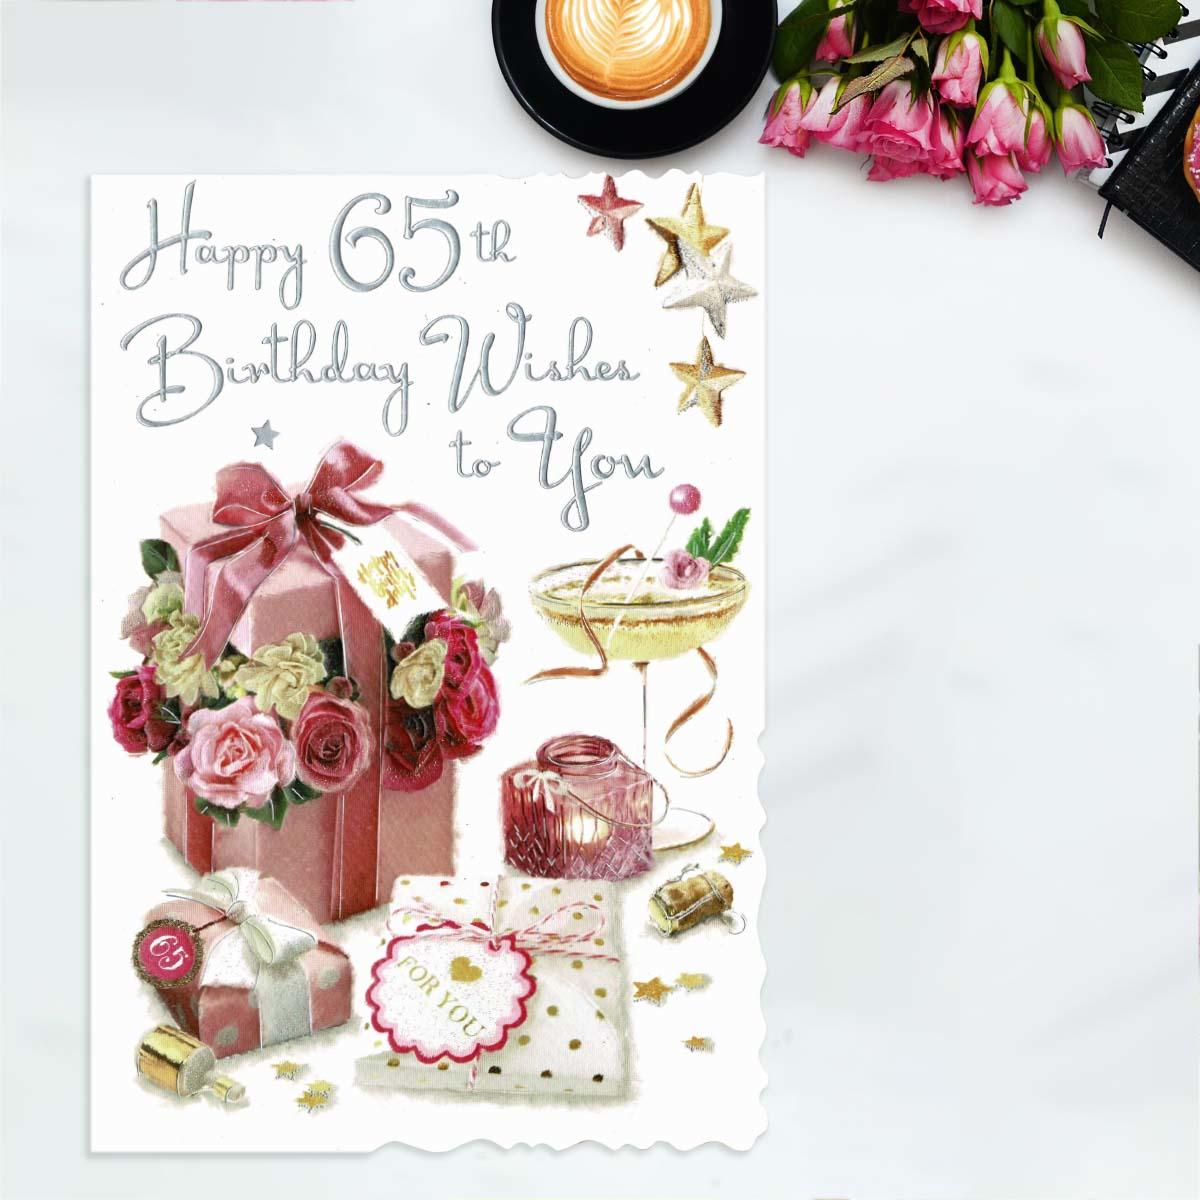 Happy 65th Birthday Wishes Card Front Image